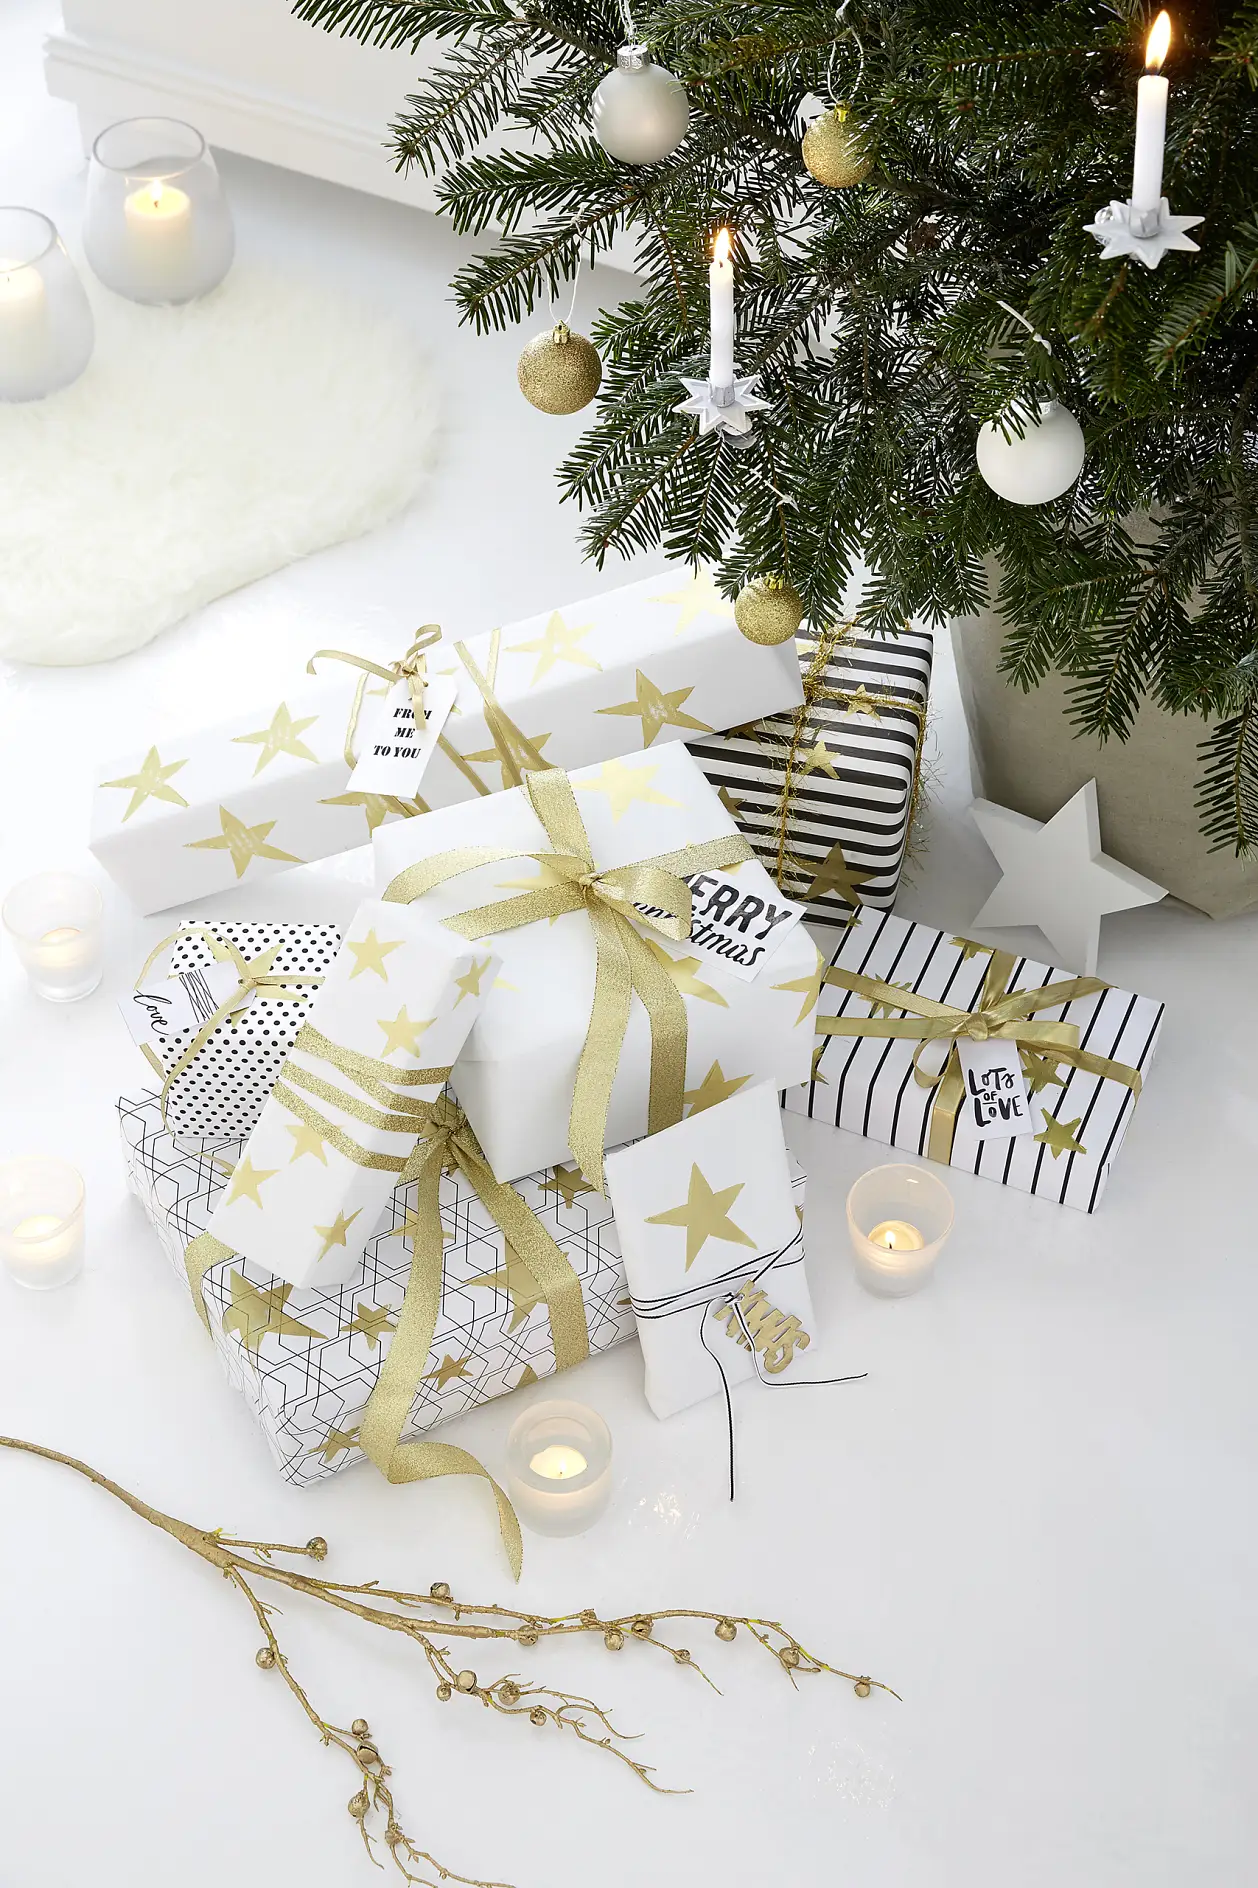 Enjoy your golden gift wrapping!